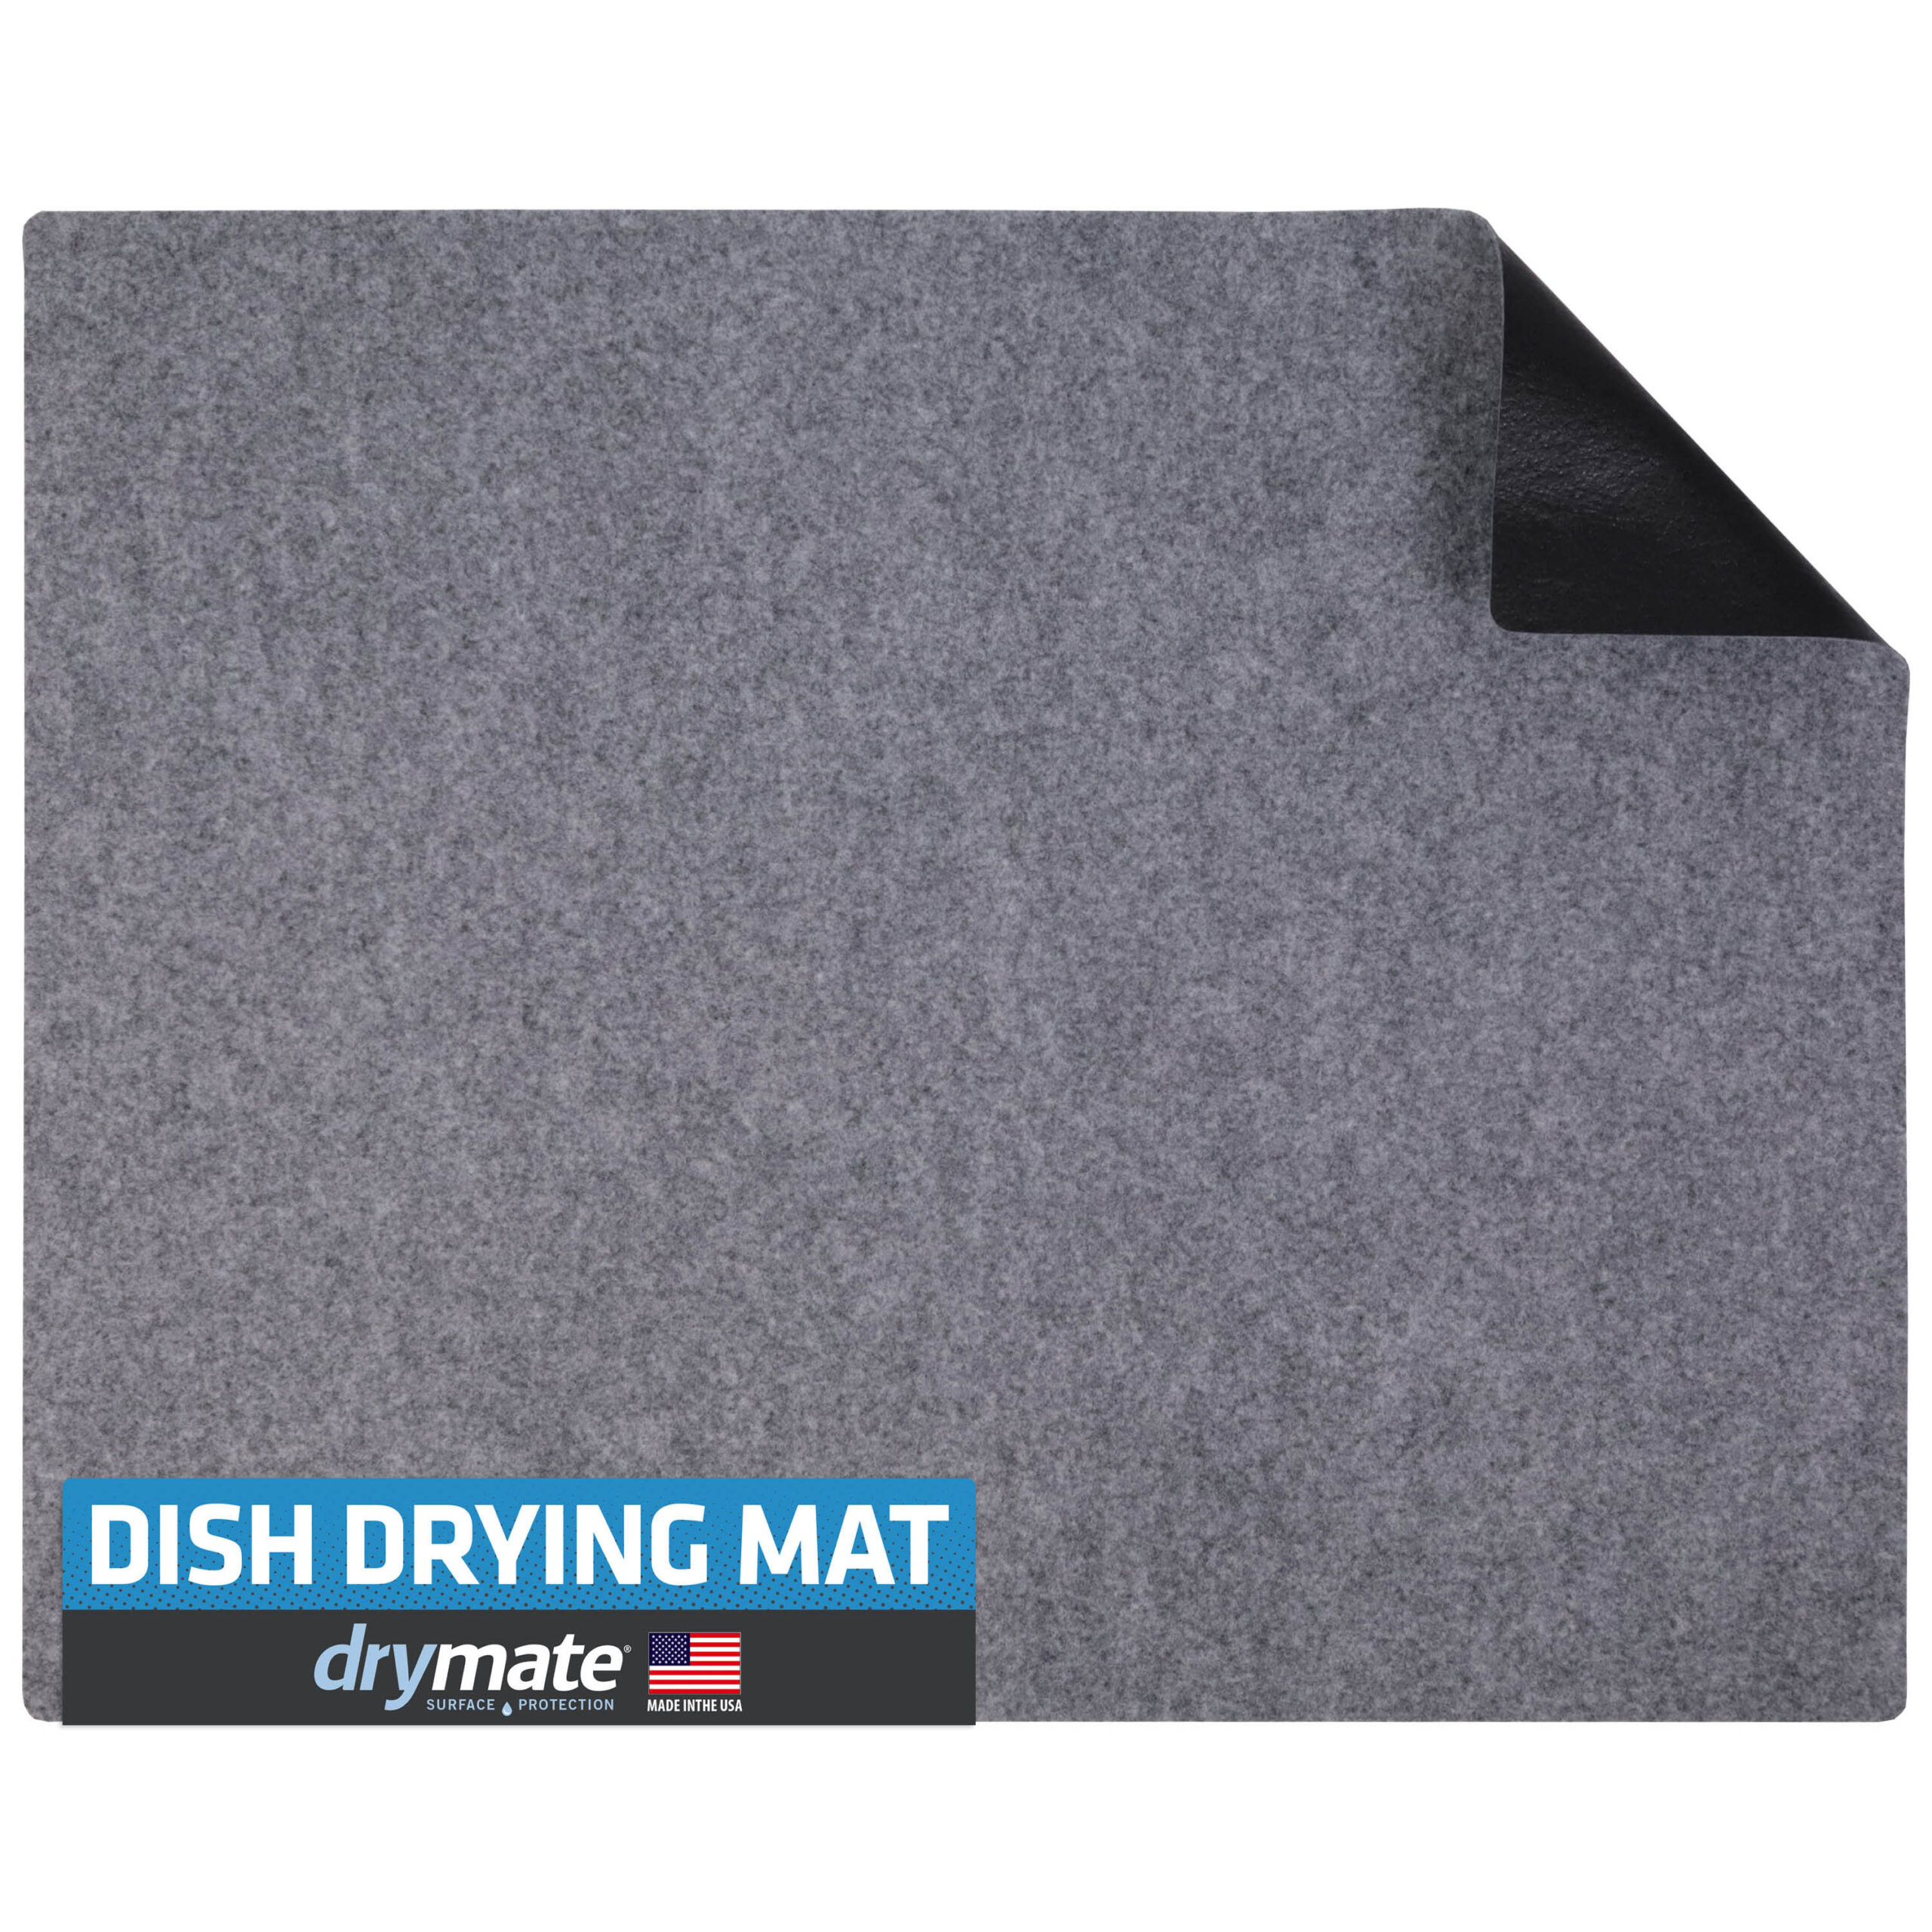 Dish Drying Mats for Kitchen Counter, Absorbent Quick Dry Dish Mat Drying  Kitchen Mat, Non-Slip Rubber Backed Grey Kitchen Drying Mat 18X24